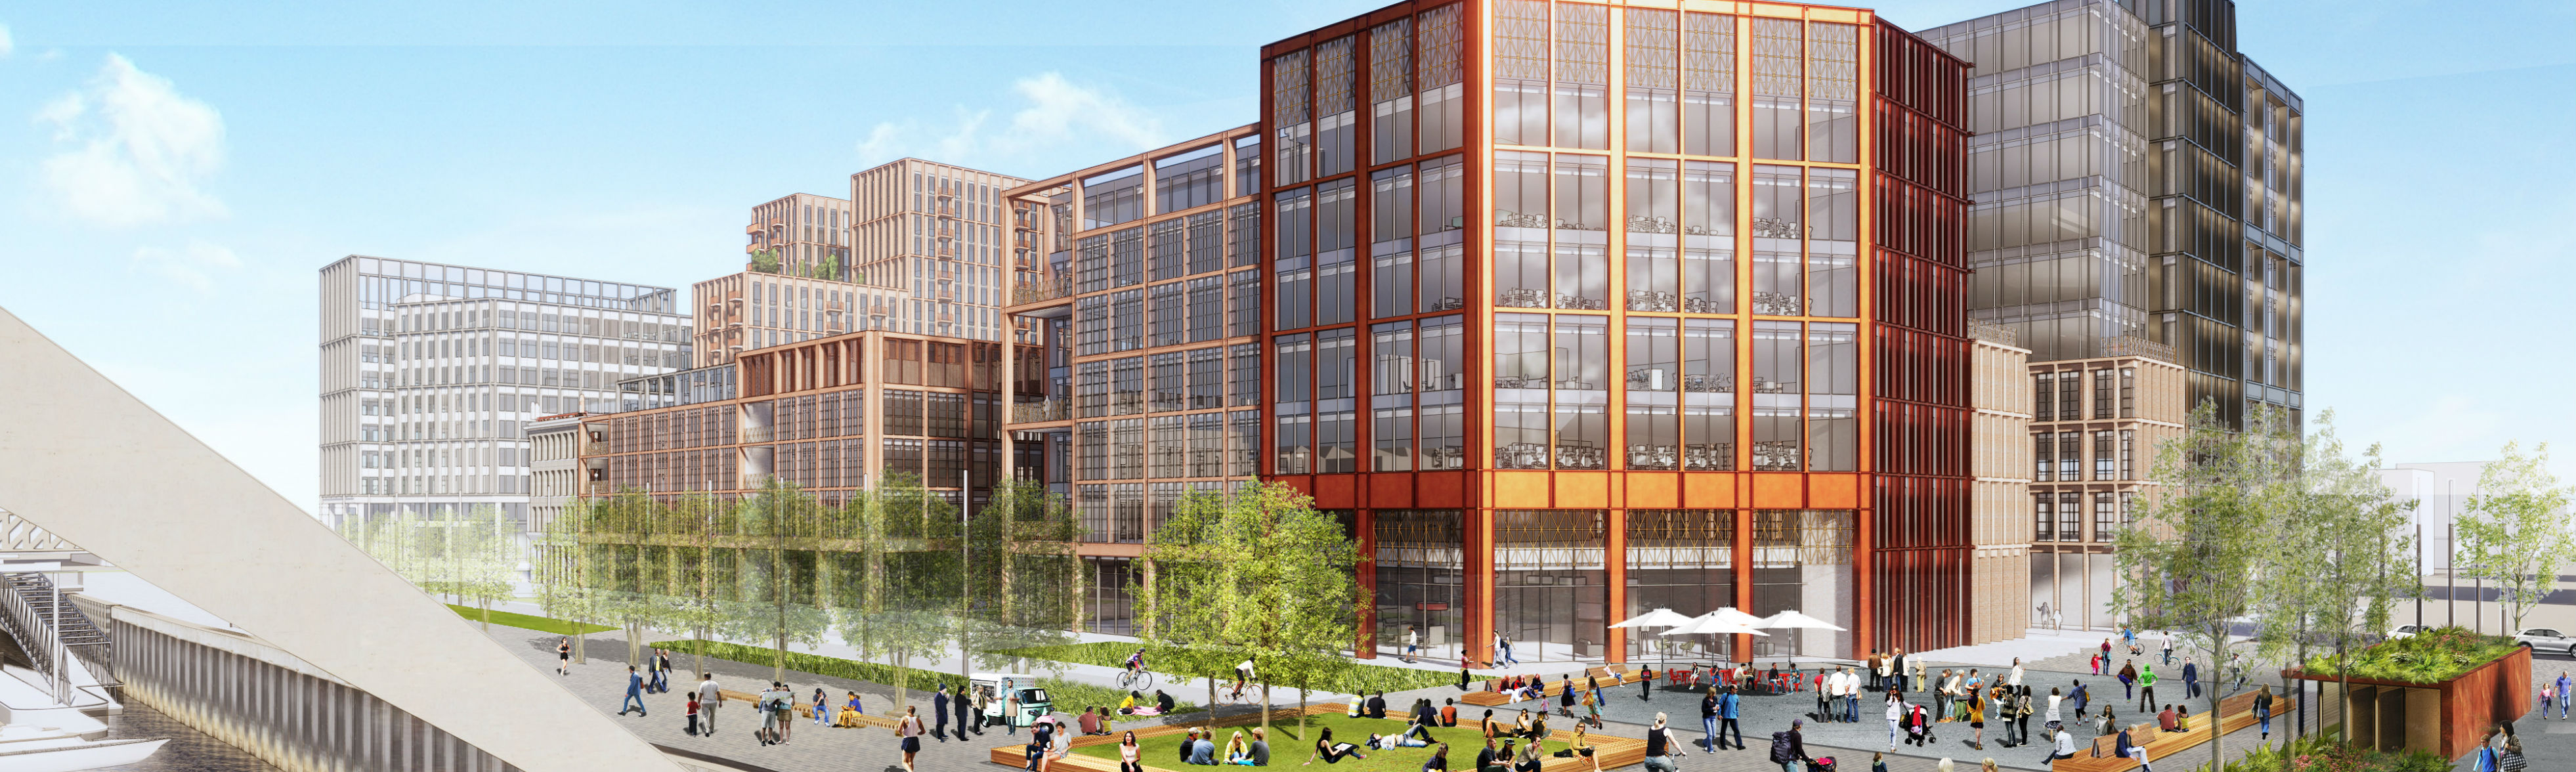 Barclays confirms plans for new Glasgow campus